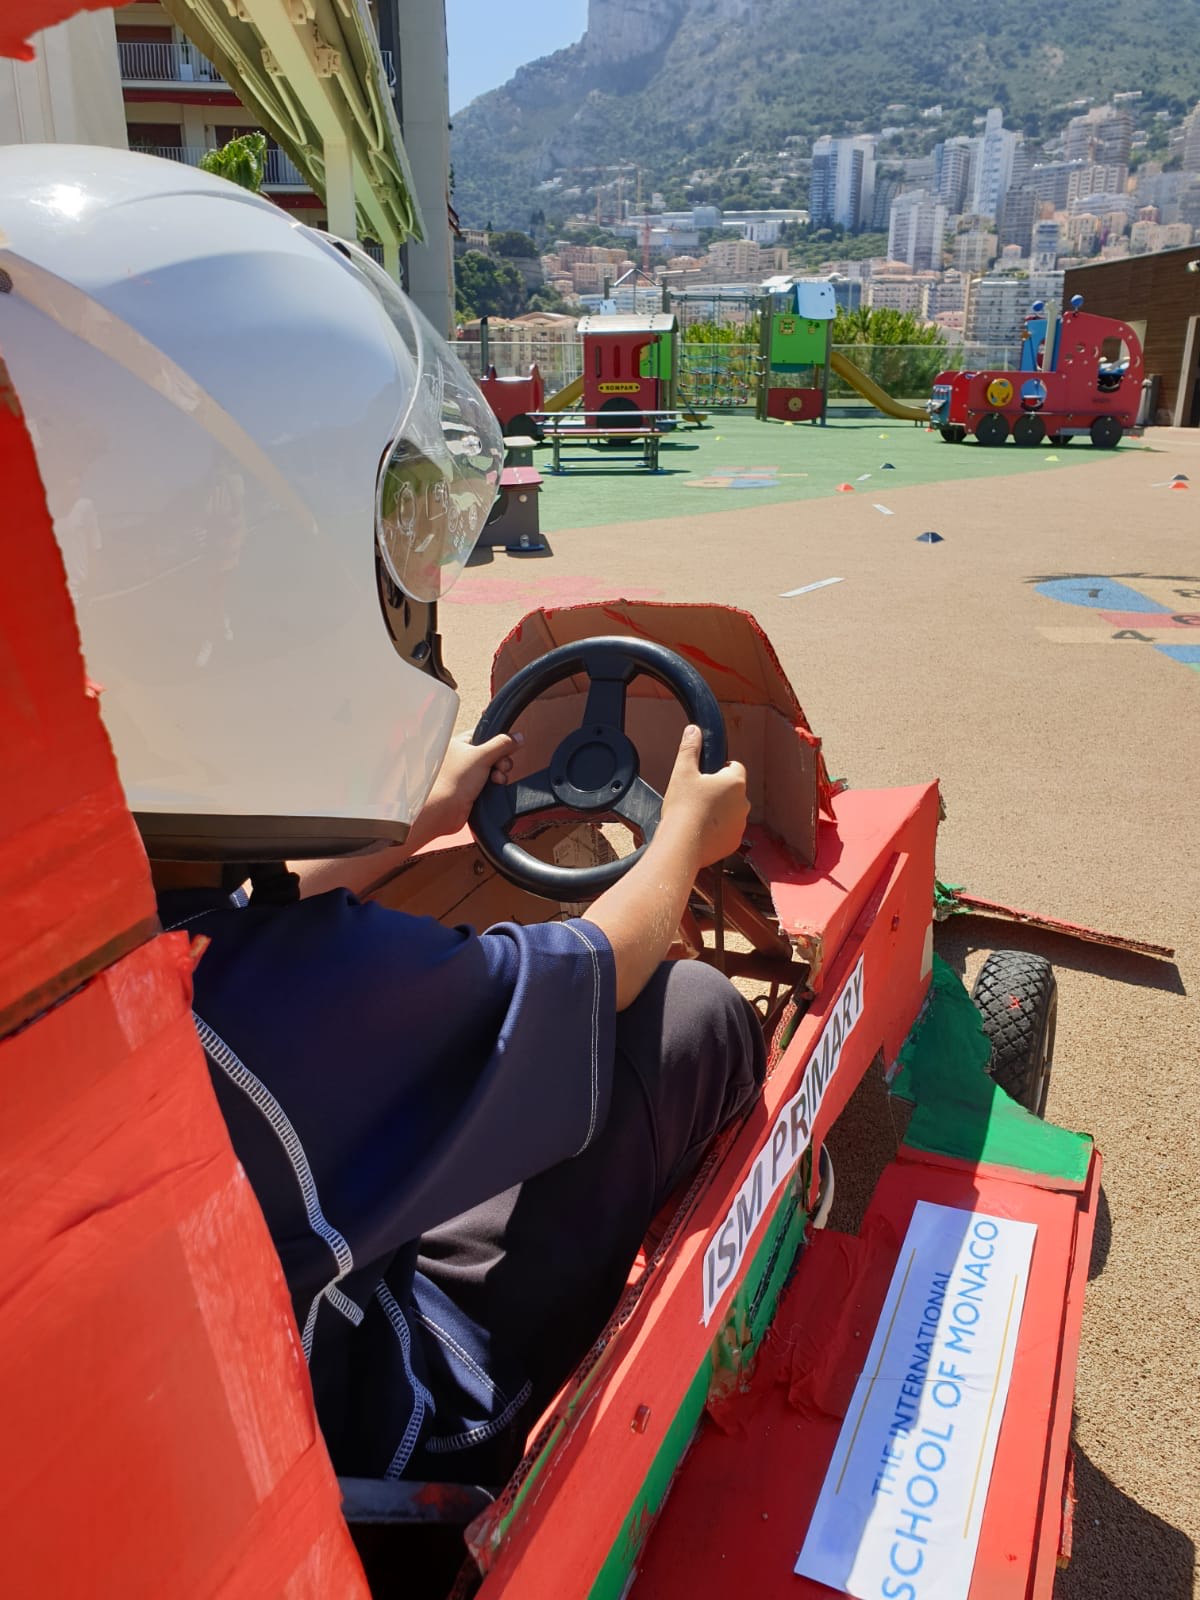 Primary School Engineering Club does test drive Image